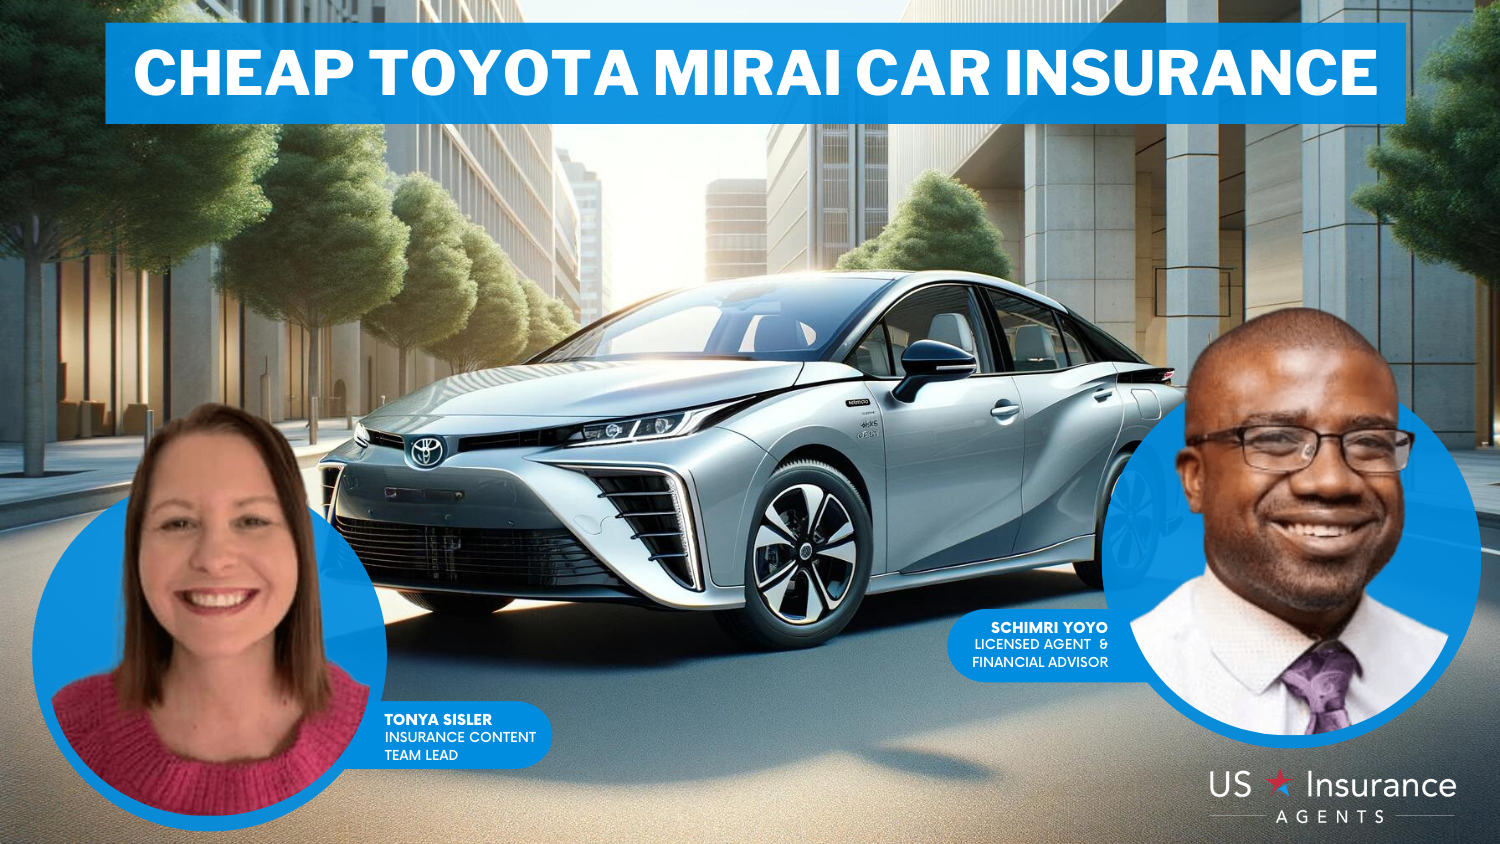 Cheap Toyota Mirai Car Insurance: The General, Allstate, and Auto-Owners